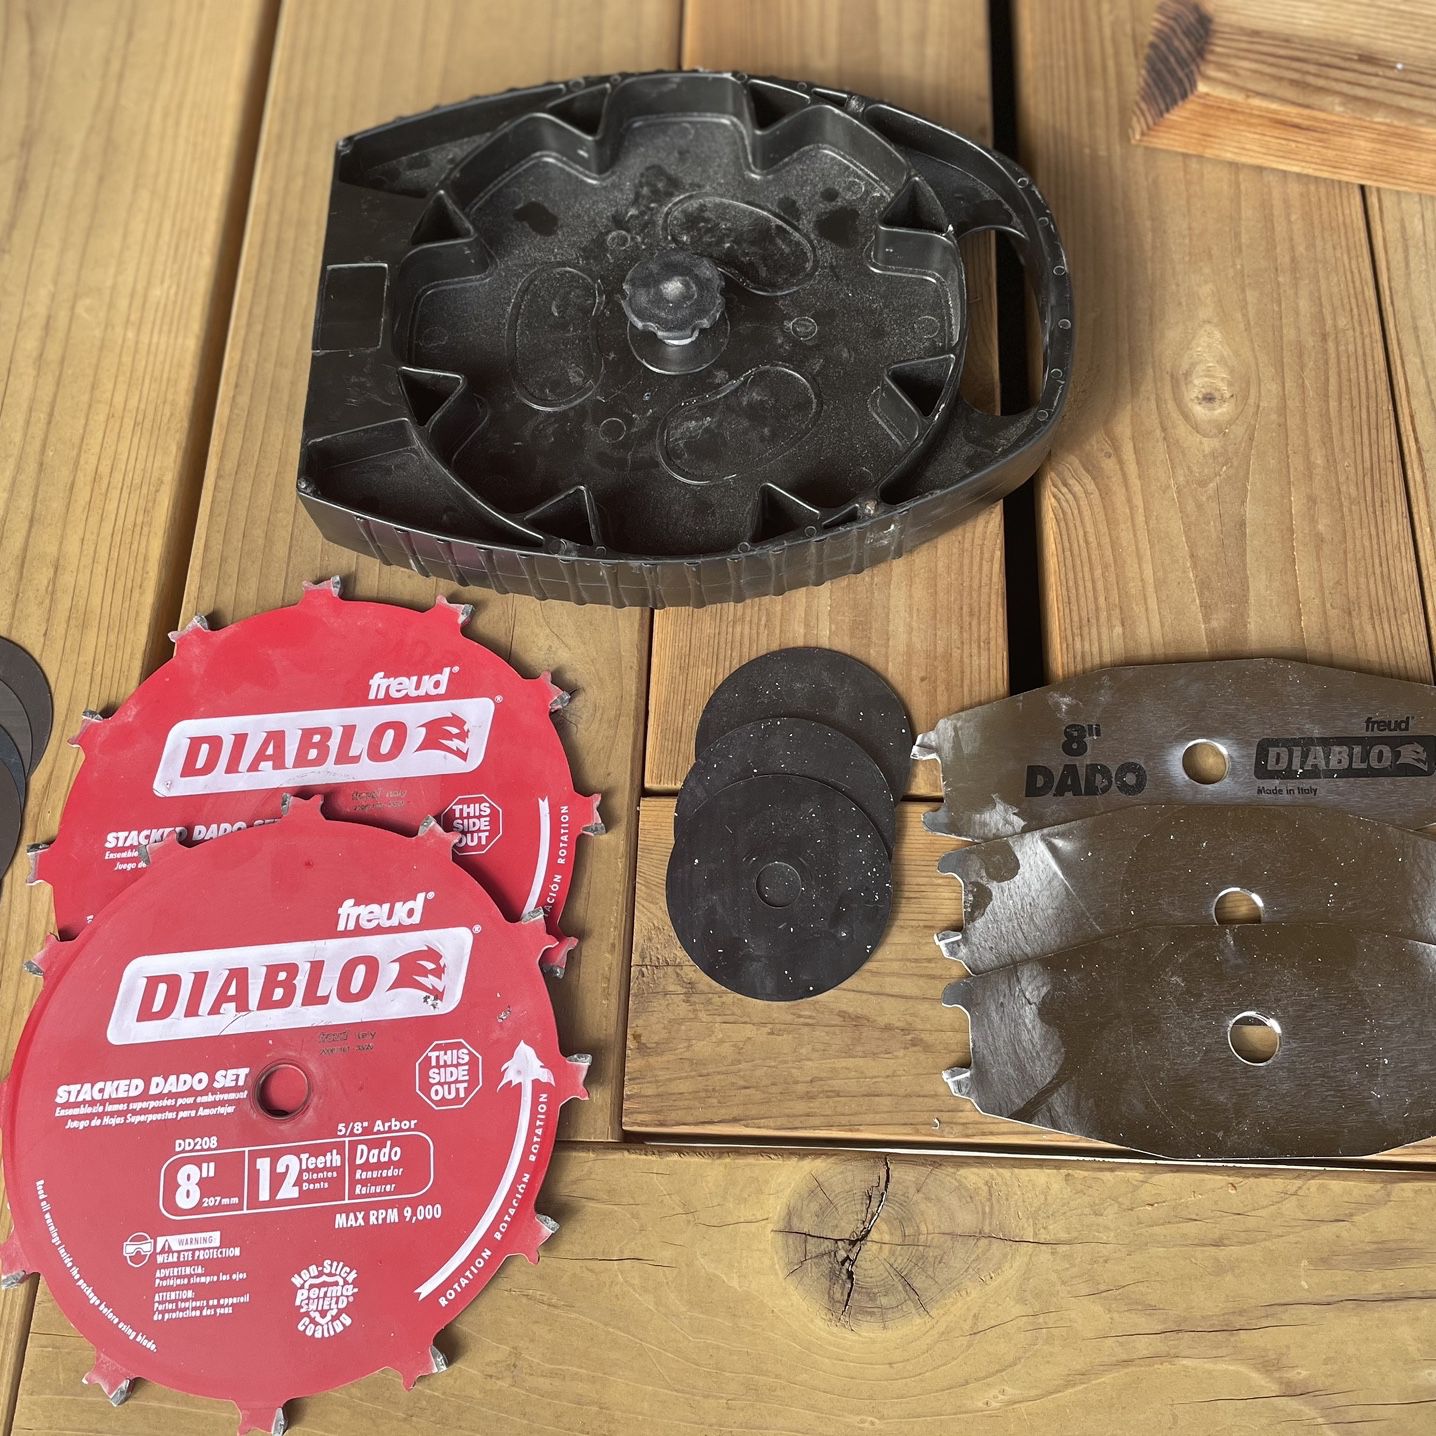 DIABLO 8 in. x 12-Tooth Stacked Dado Saw Blade Set